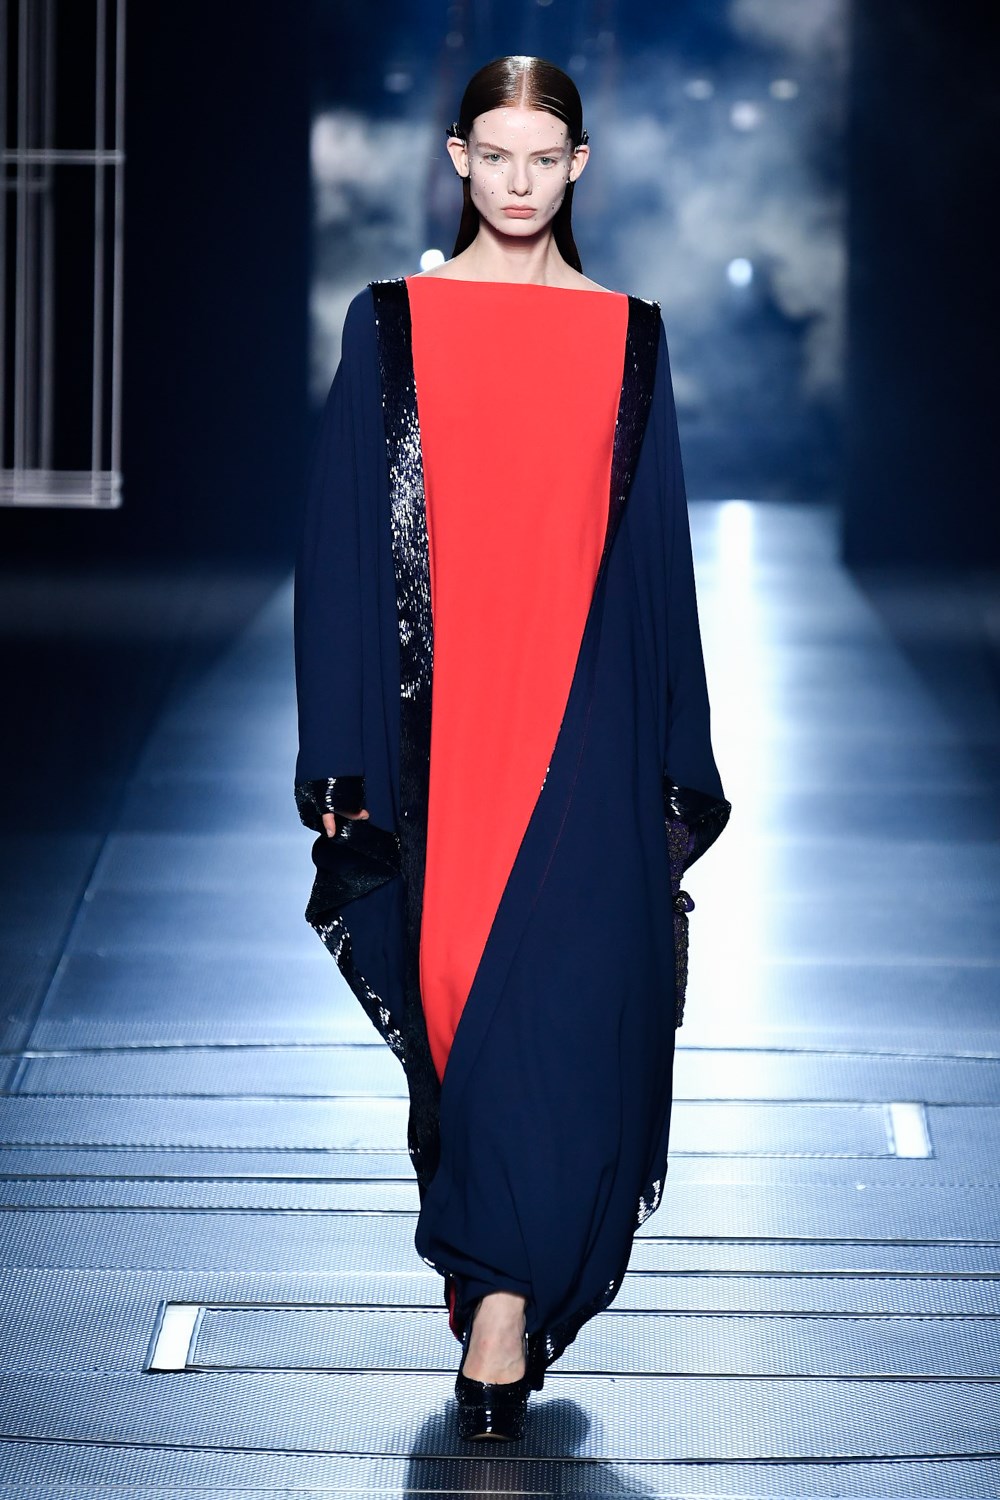 Review of Fendi Spring 2022 Couture Fashion Show